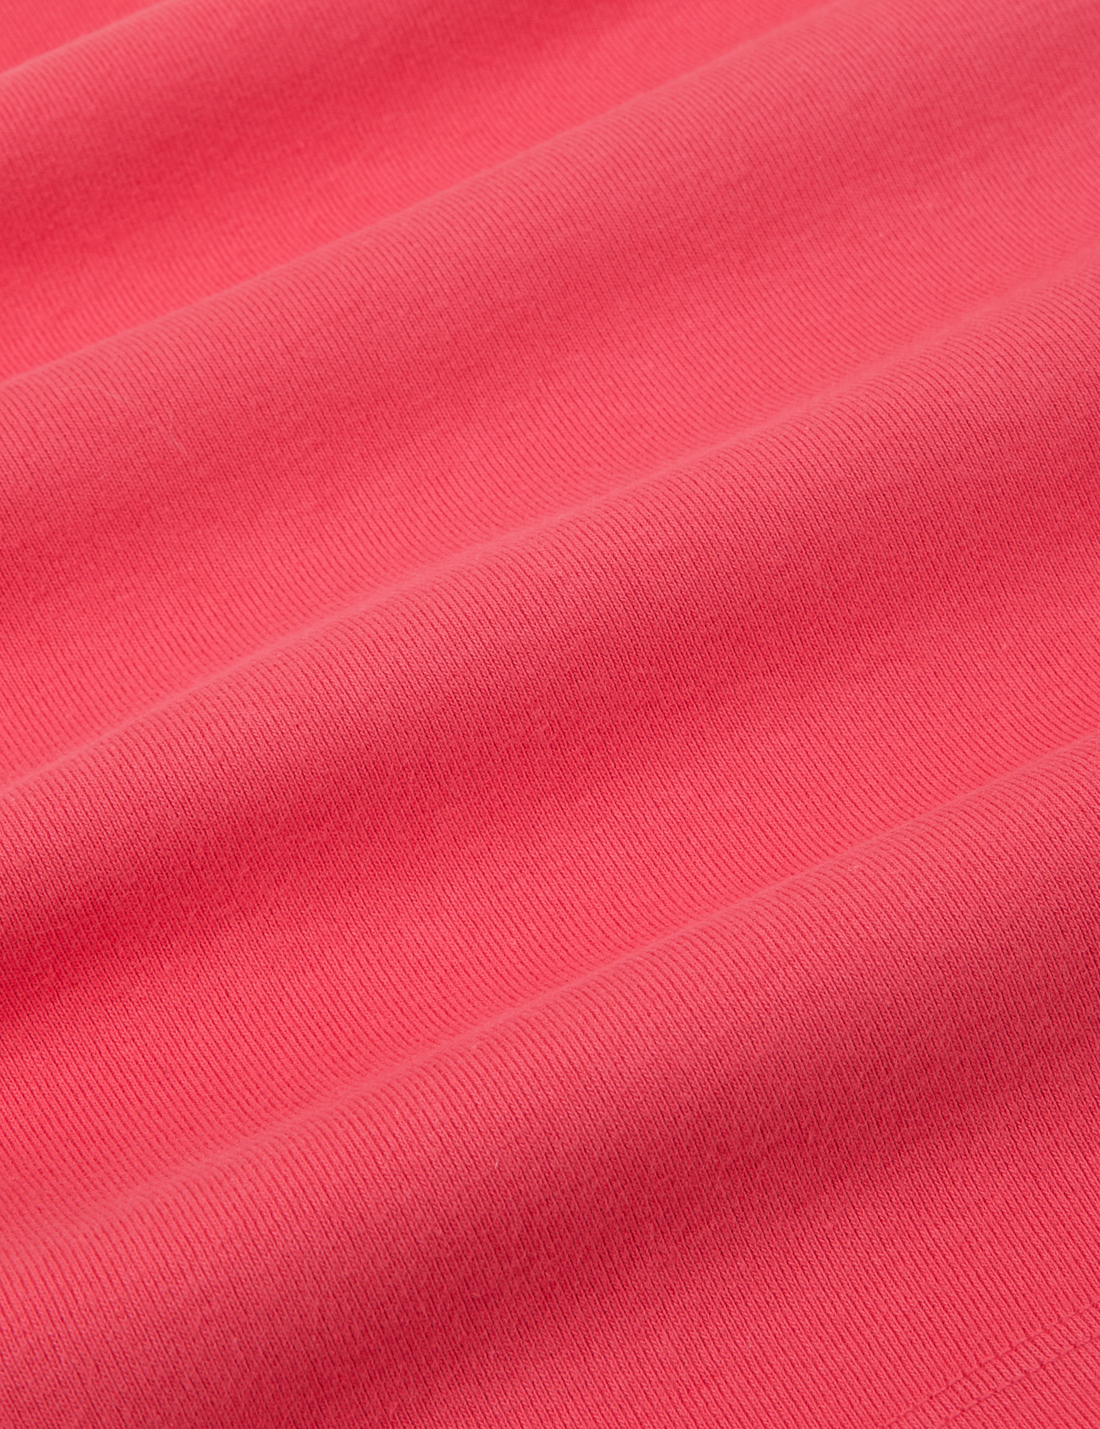 Halter Top in Hot Pink fabric detail close up